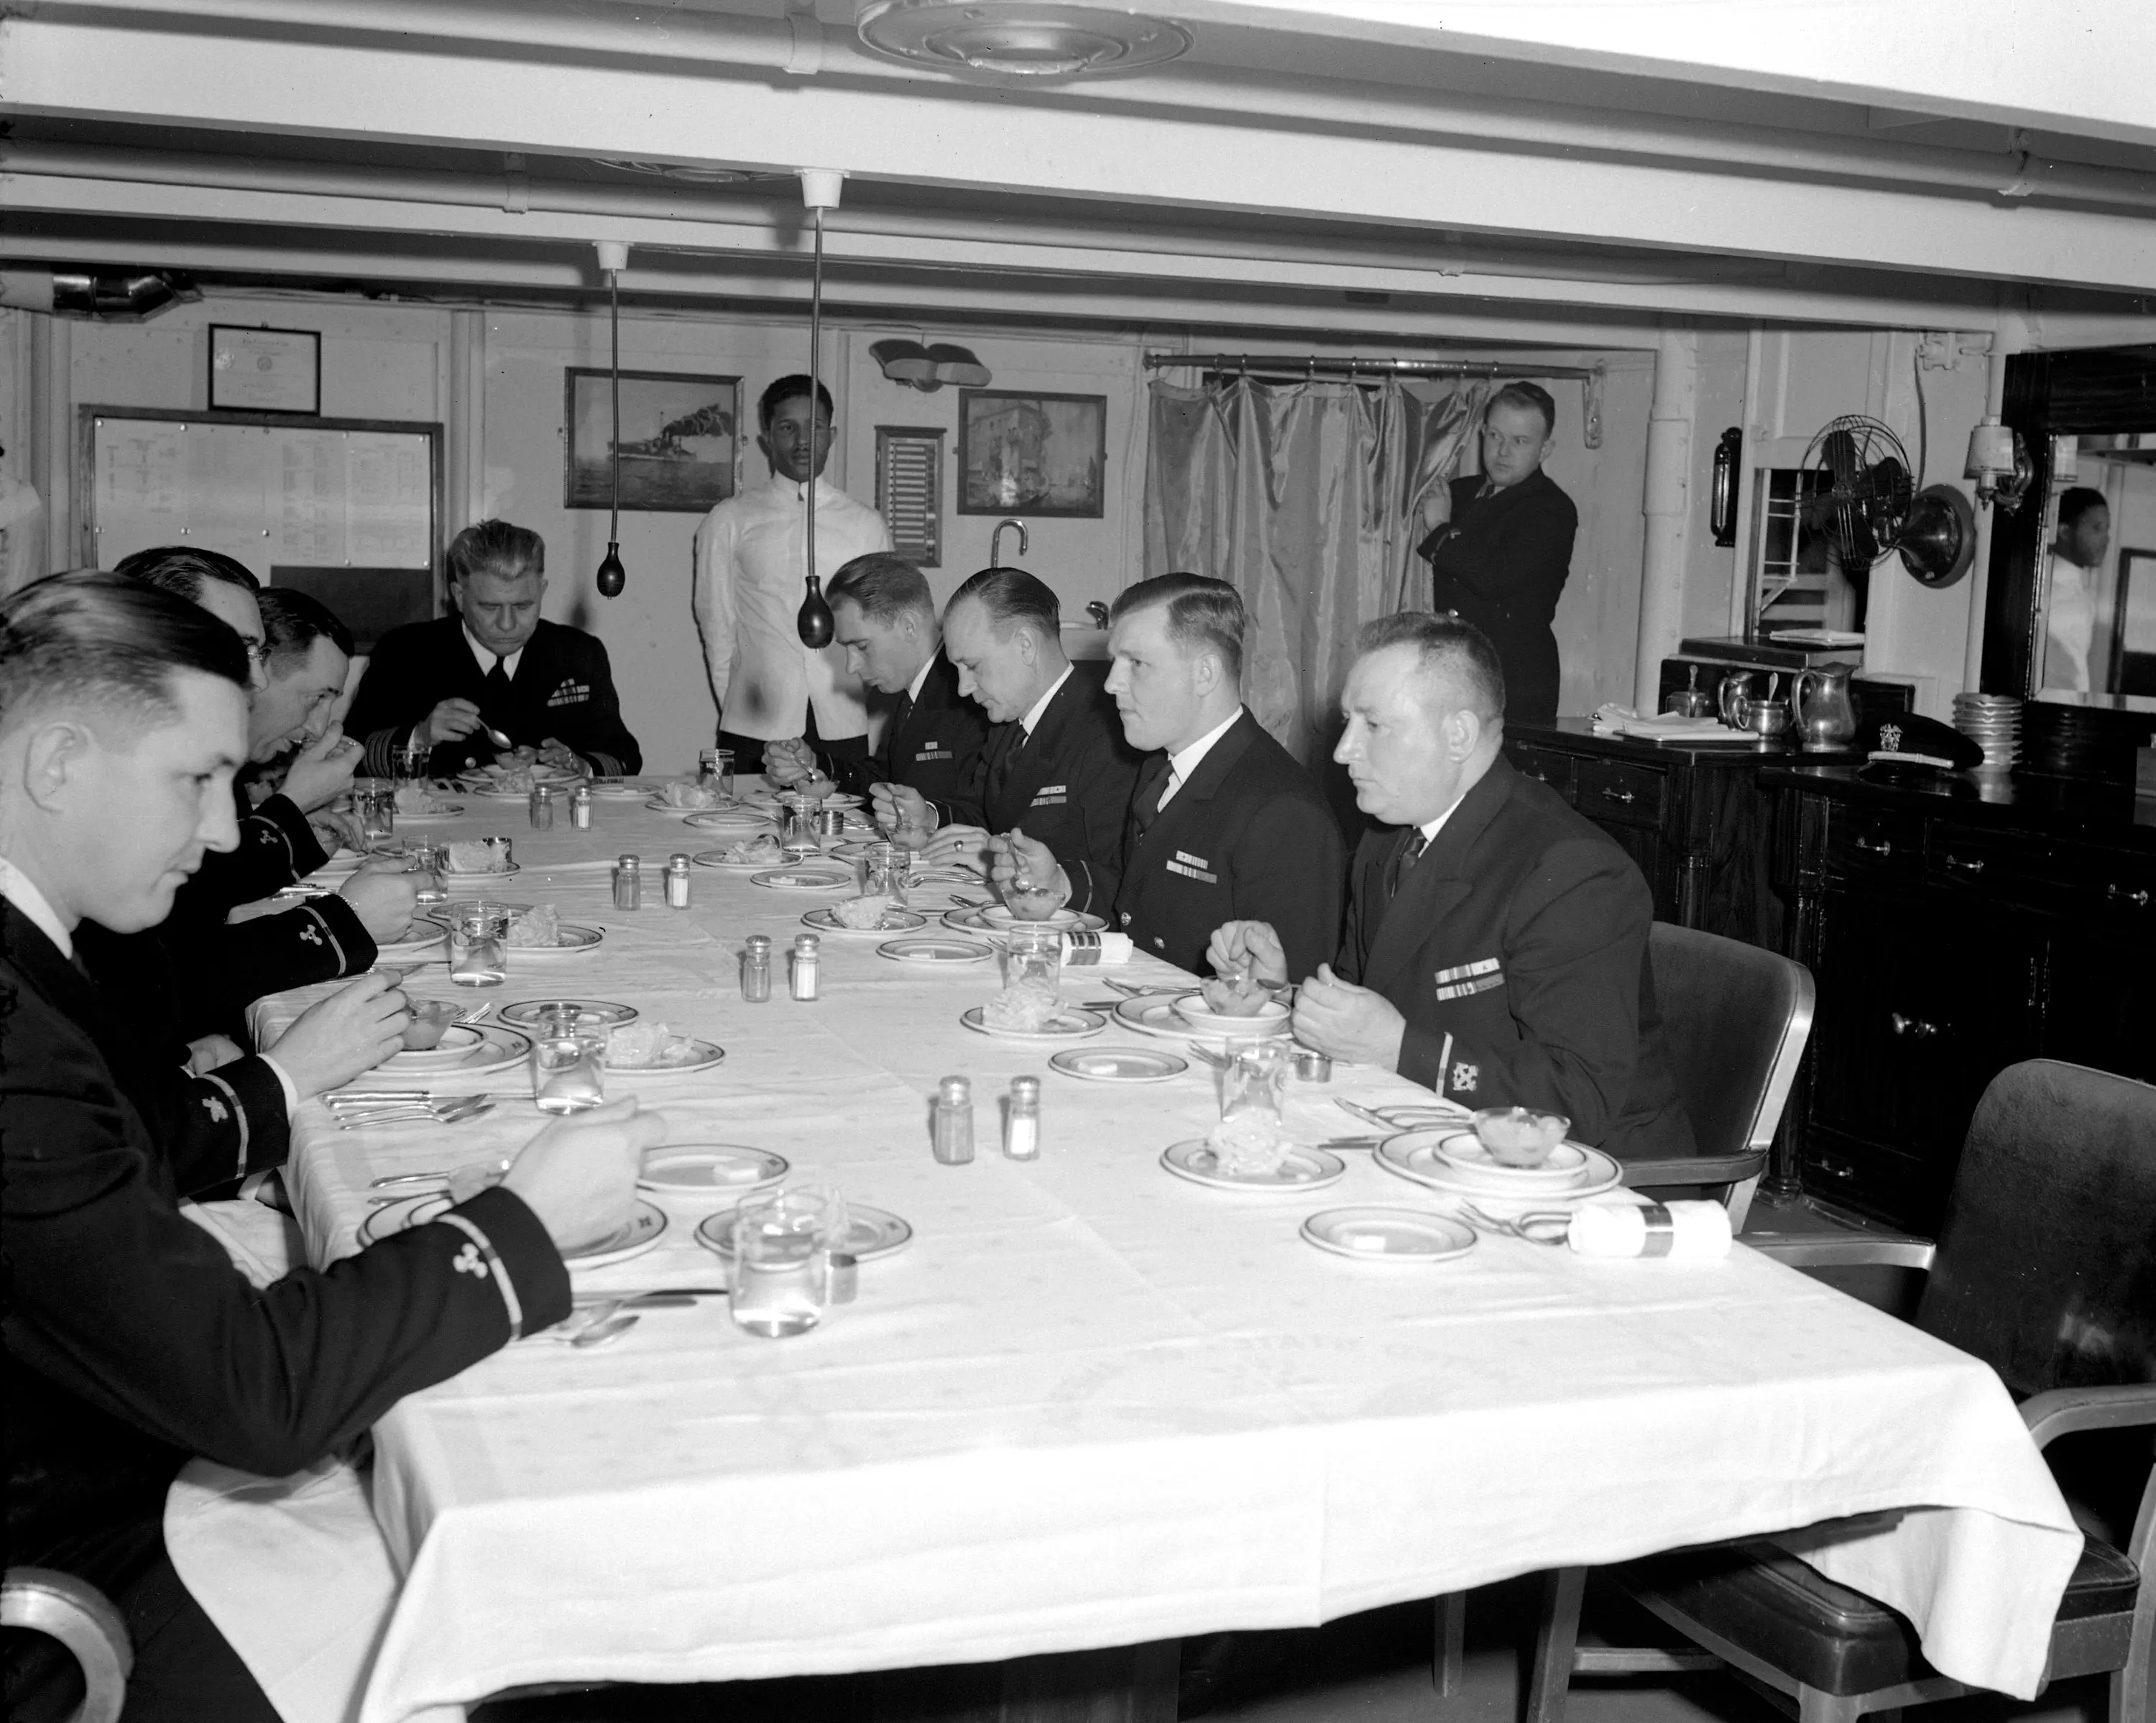 A black and white photograph of warrant officers dining onboard a ship. At the head of the table is the ship's captain. The table is set for formal dining and a Filipino steward in white stands next to the Captain.